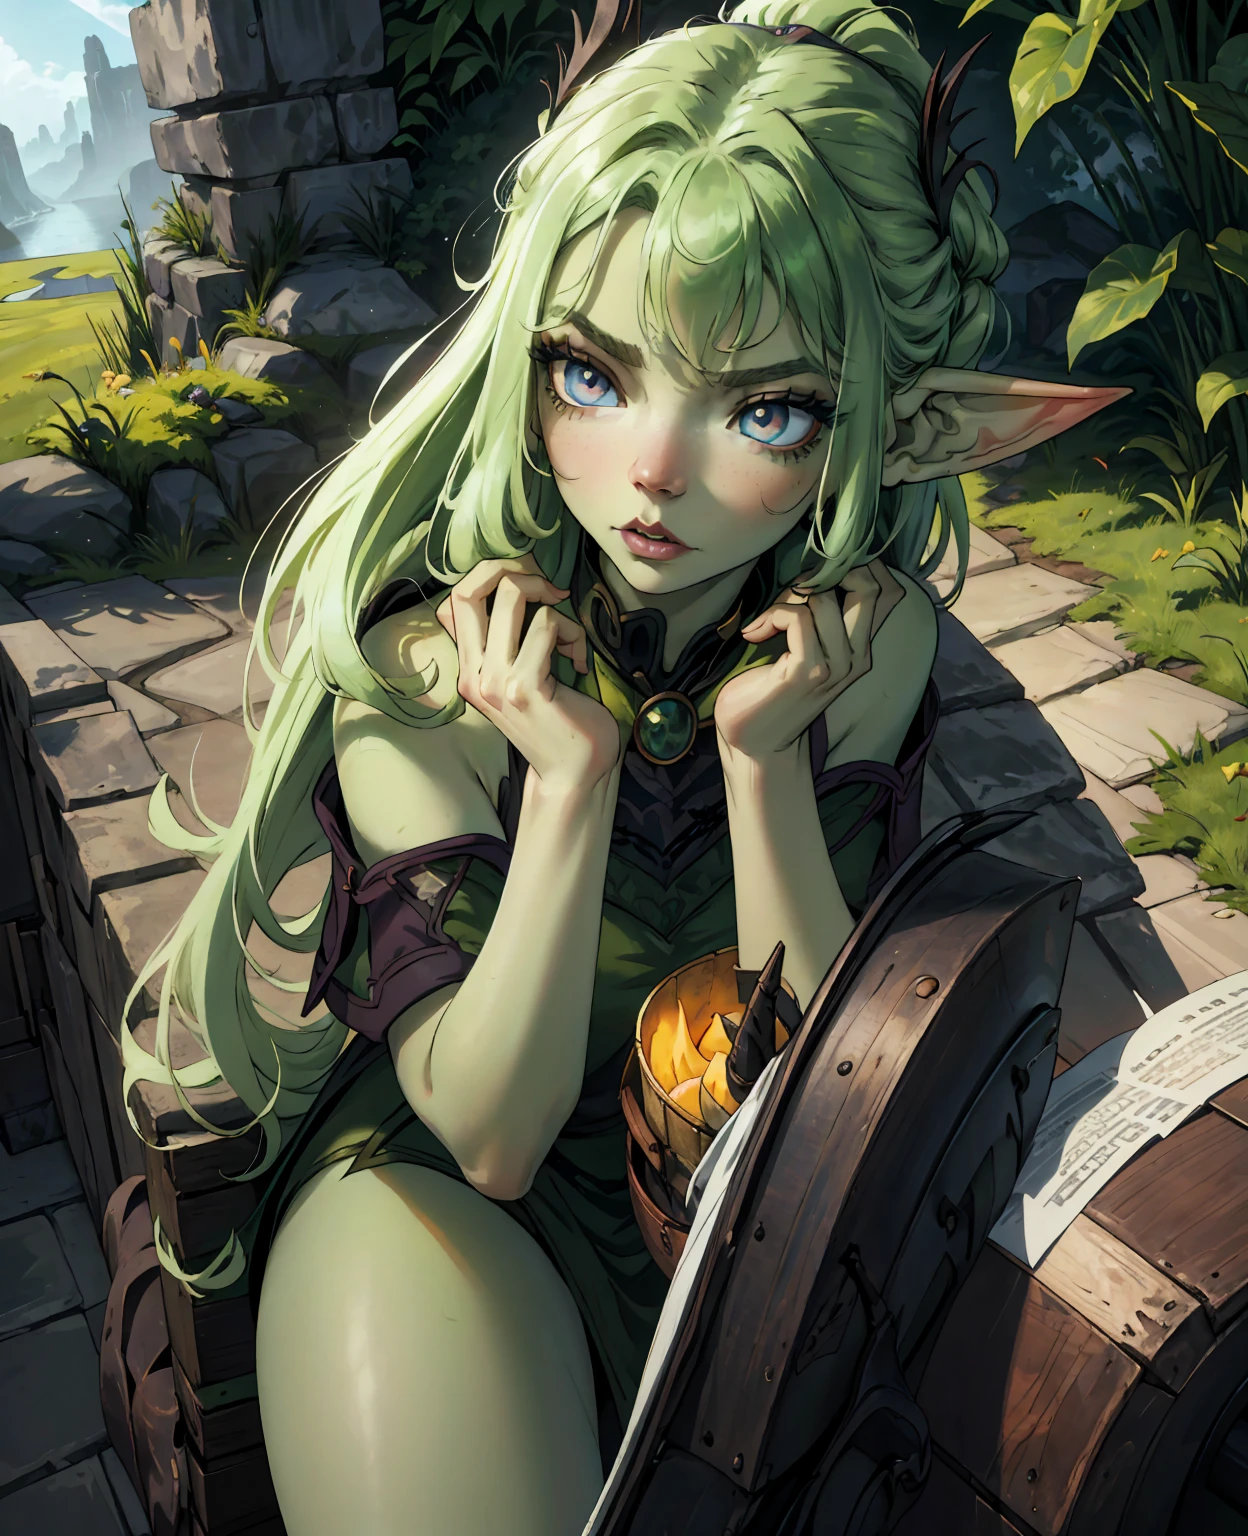 (Anya Taylor Joy as a goblin girl, 1girl, beautiful detailed eyes, beautiful detailed lips, extremely detailed face and features, long eyelashes, goblin, green skin, pointed ears, fantasy, intricate costume, detailed ornaments, magical, enchanted forest, lush foliage, sunlight filtering through leaves, warm color palette, cinematic lighting, dramatic shadows, high quality, 8k, photorealistic, masterpiece)